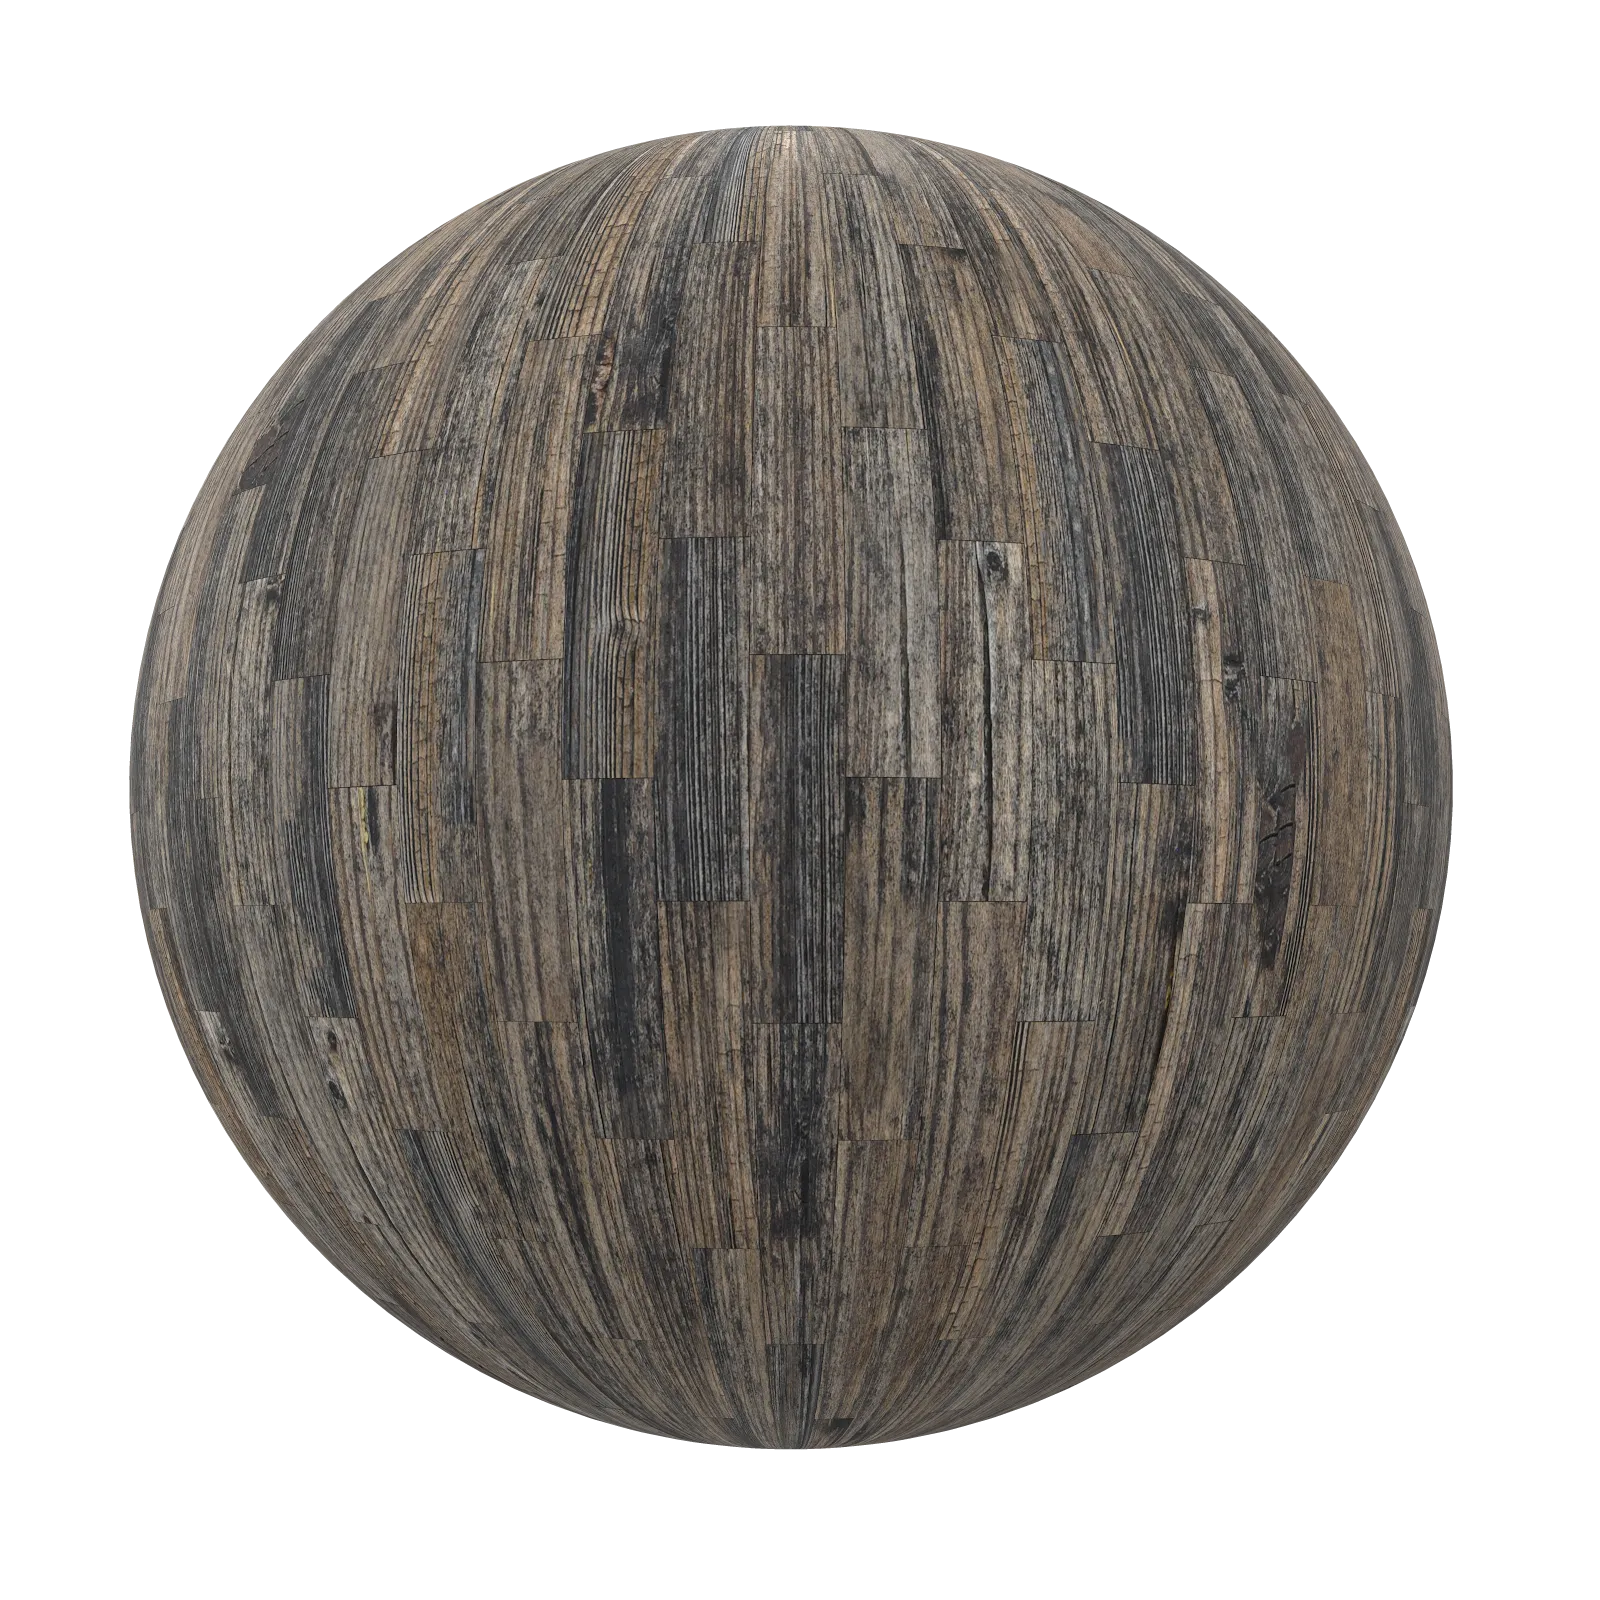 TEXTURES – WOOD – Old Wood Tiles 6